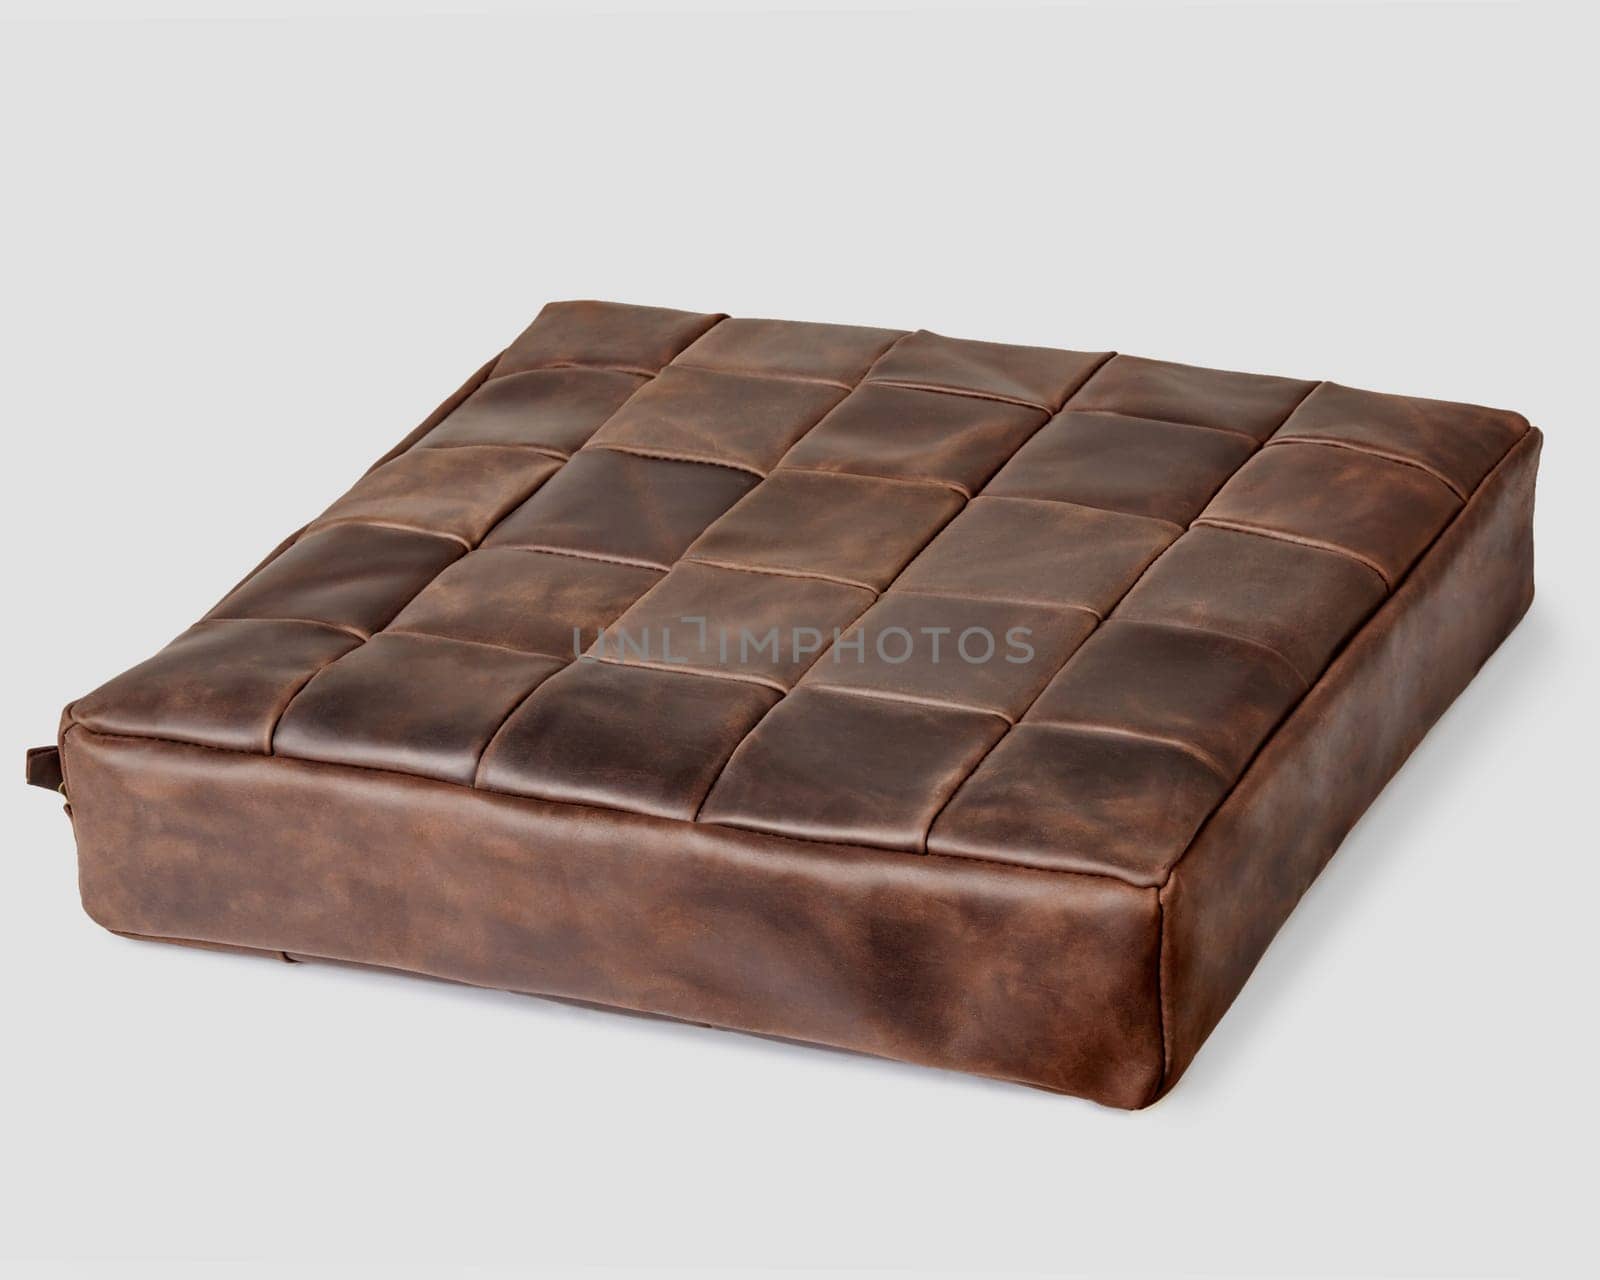 Decorative soft seat cushion upholstered by brown leather patches for comfort and stylish home interior design. Artisanal genuine leather products